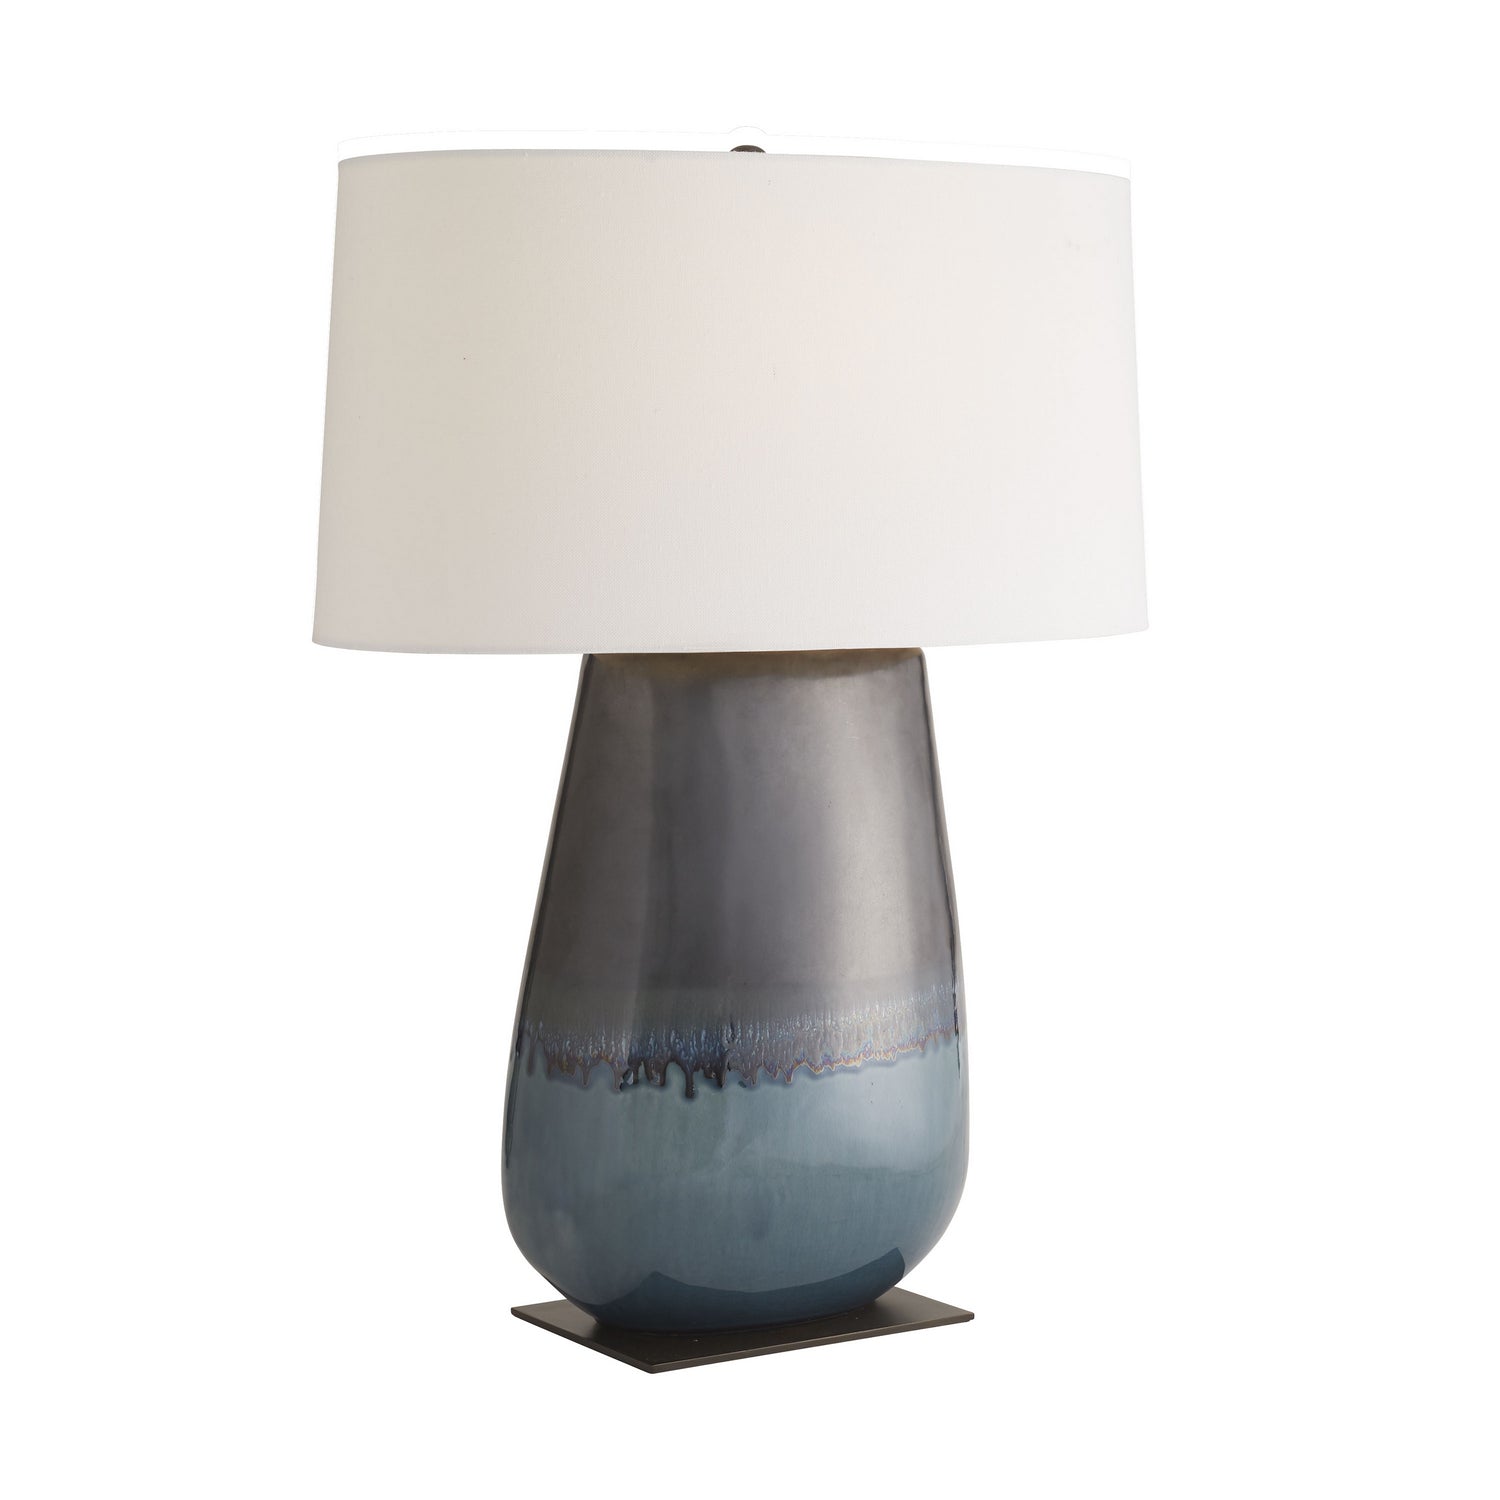 One Light Table Lamp from the Deagan collection in Gunmetal & Teal Reactive finish